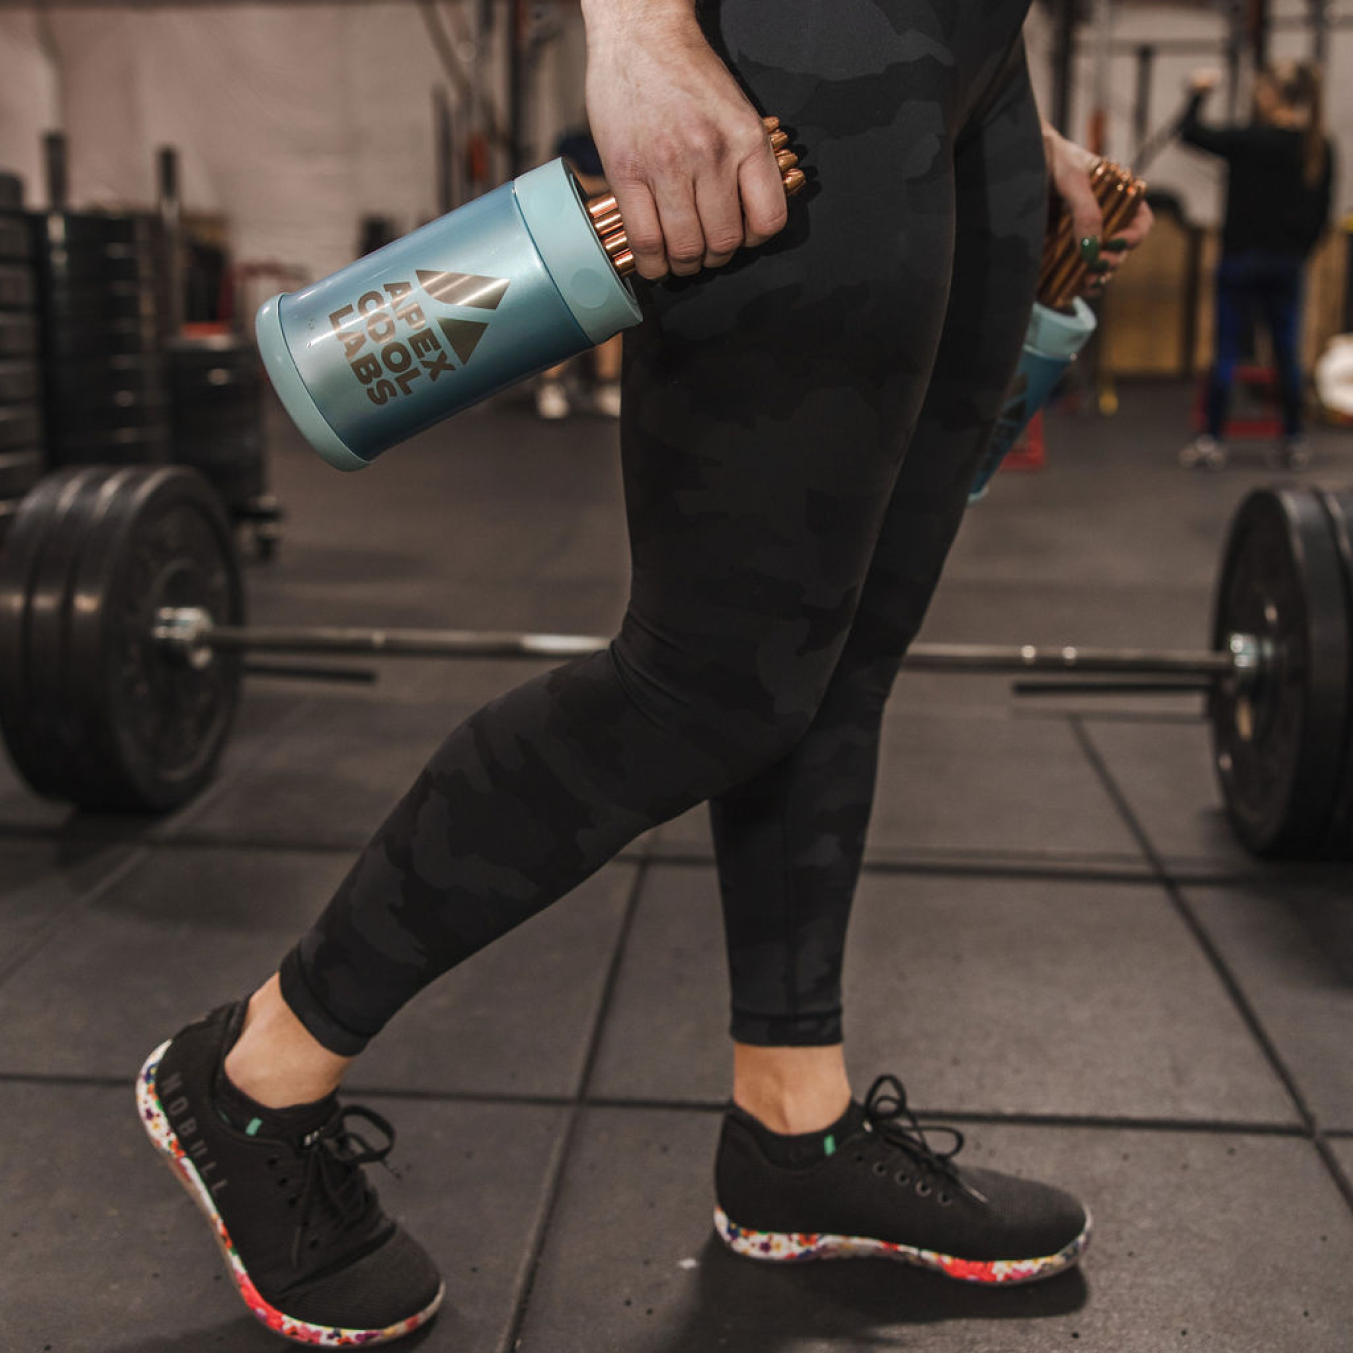 Woman holding a palm cooling device in gym